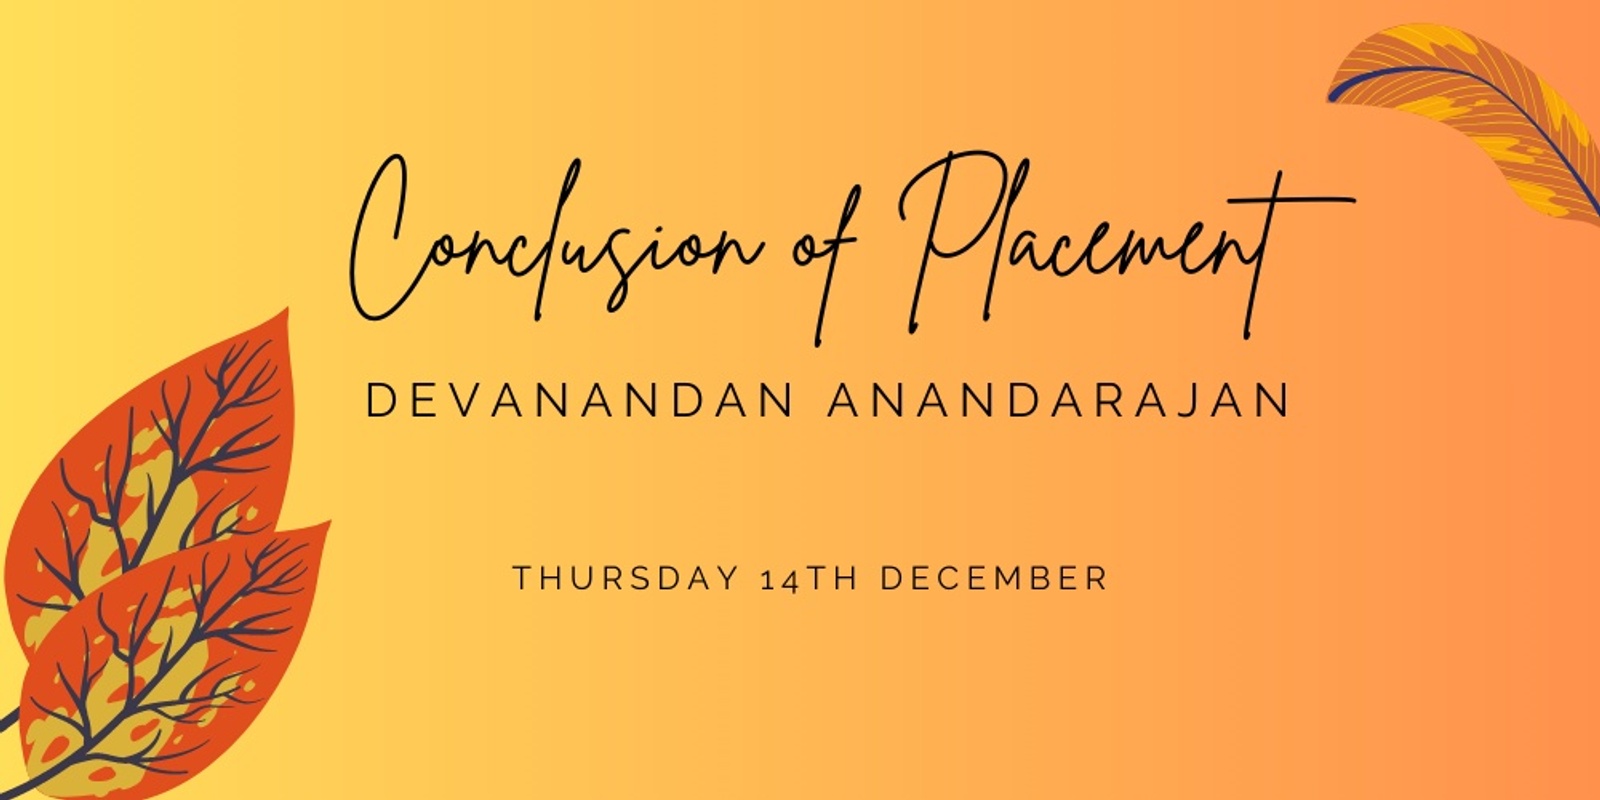 Banner image for Conclusion of Placement for Devanandan Anandarajan